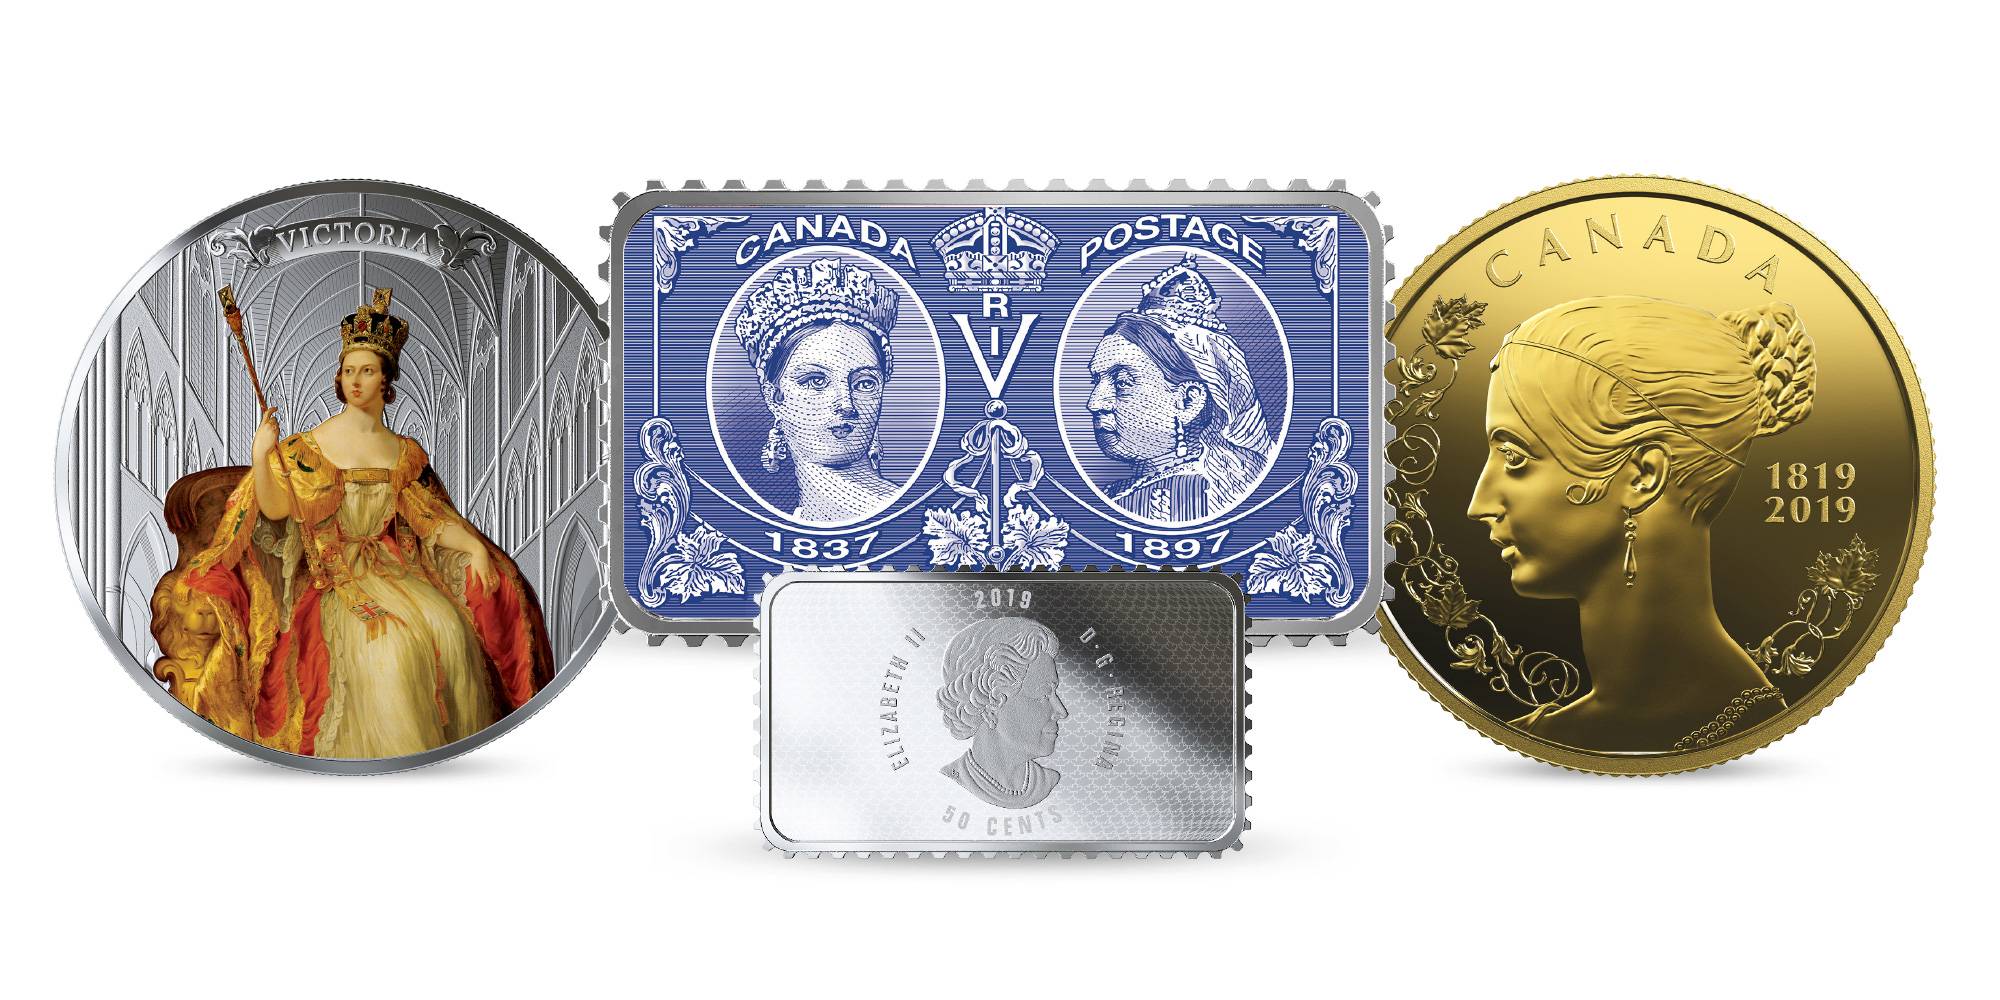 For the Royal Canadian Mint, celebrating Canadian history and sharing stories about Canada’s rich past is one of the things Mint employees are most passionate about. When delving into the history of Queen Victoria, the Mint’s product development team was inspired by what they found in their research and have brought forward treasures from the past, in the shape of three new coins, to commemorate the 200th anniversary of the birth of Queen Victoria